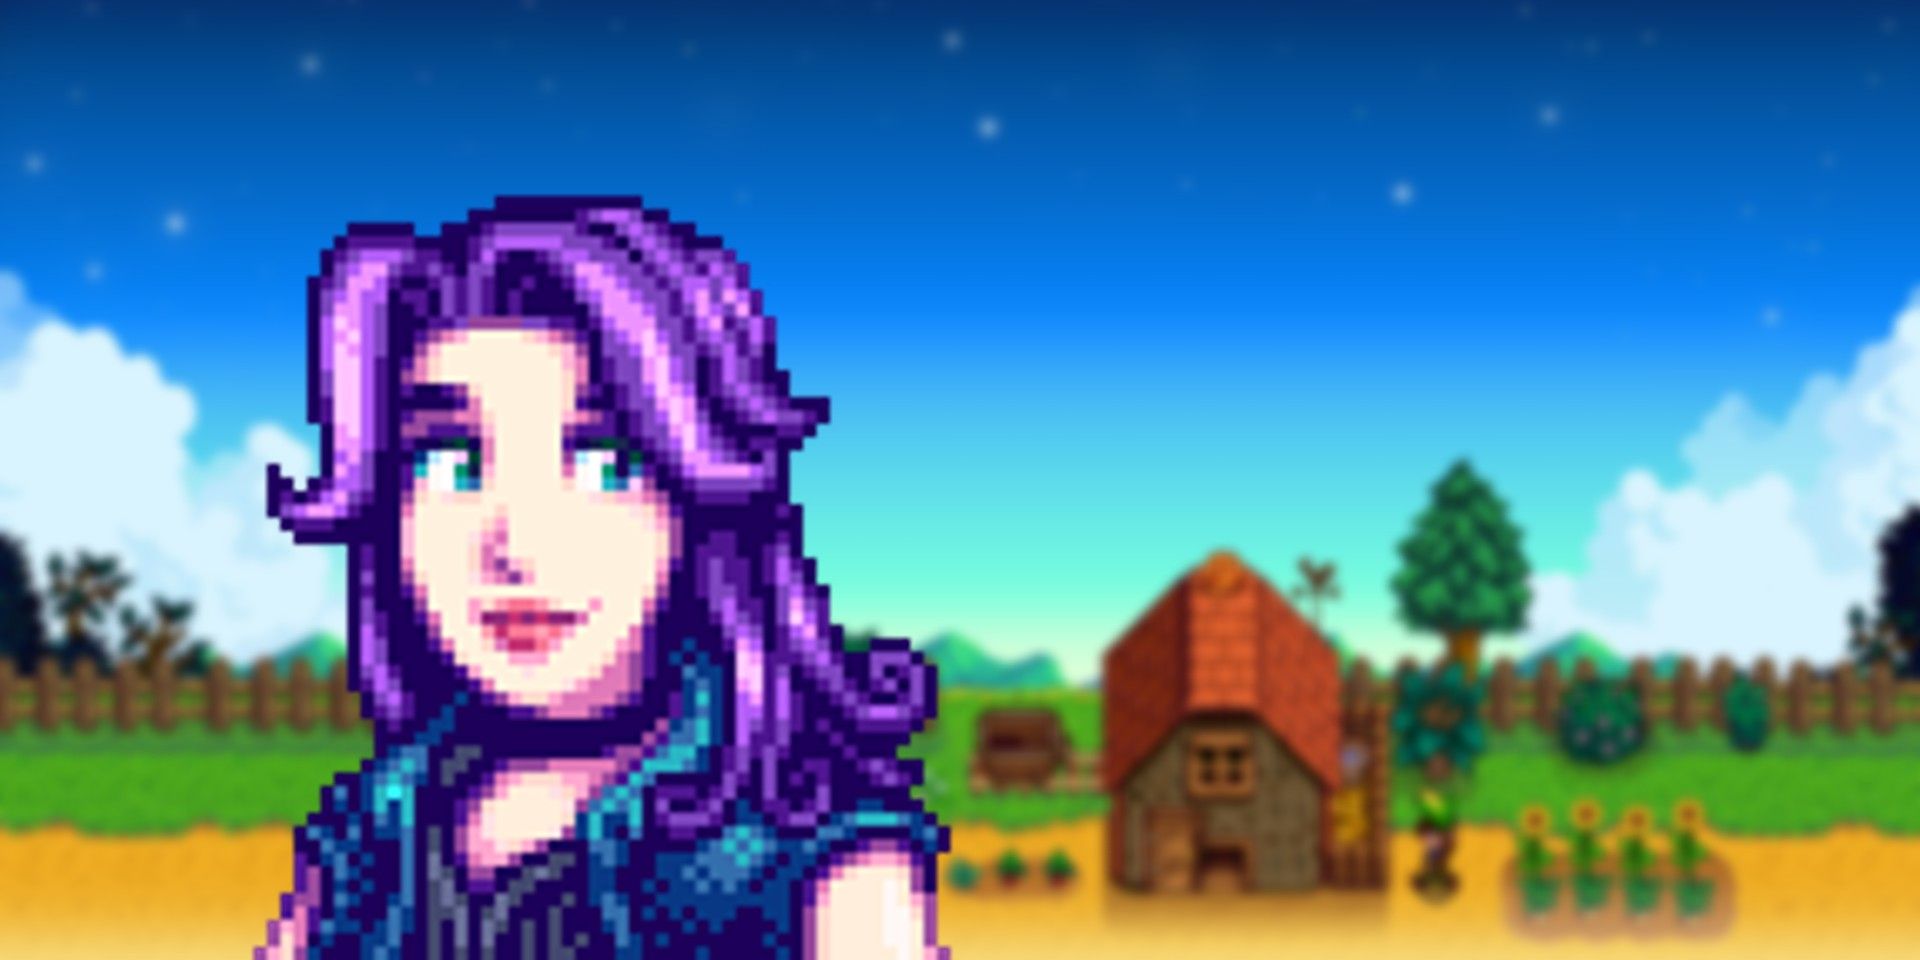 Abigail from Stardew Valley on a slightly blurred farm background